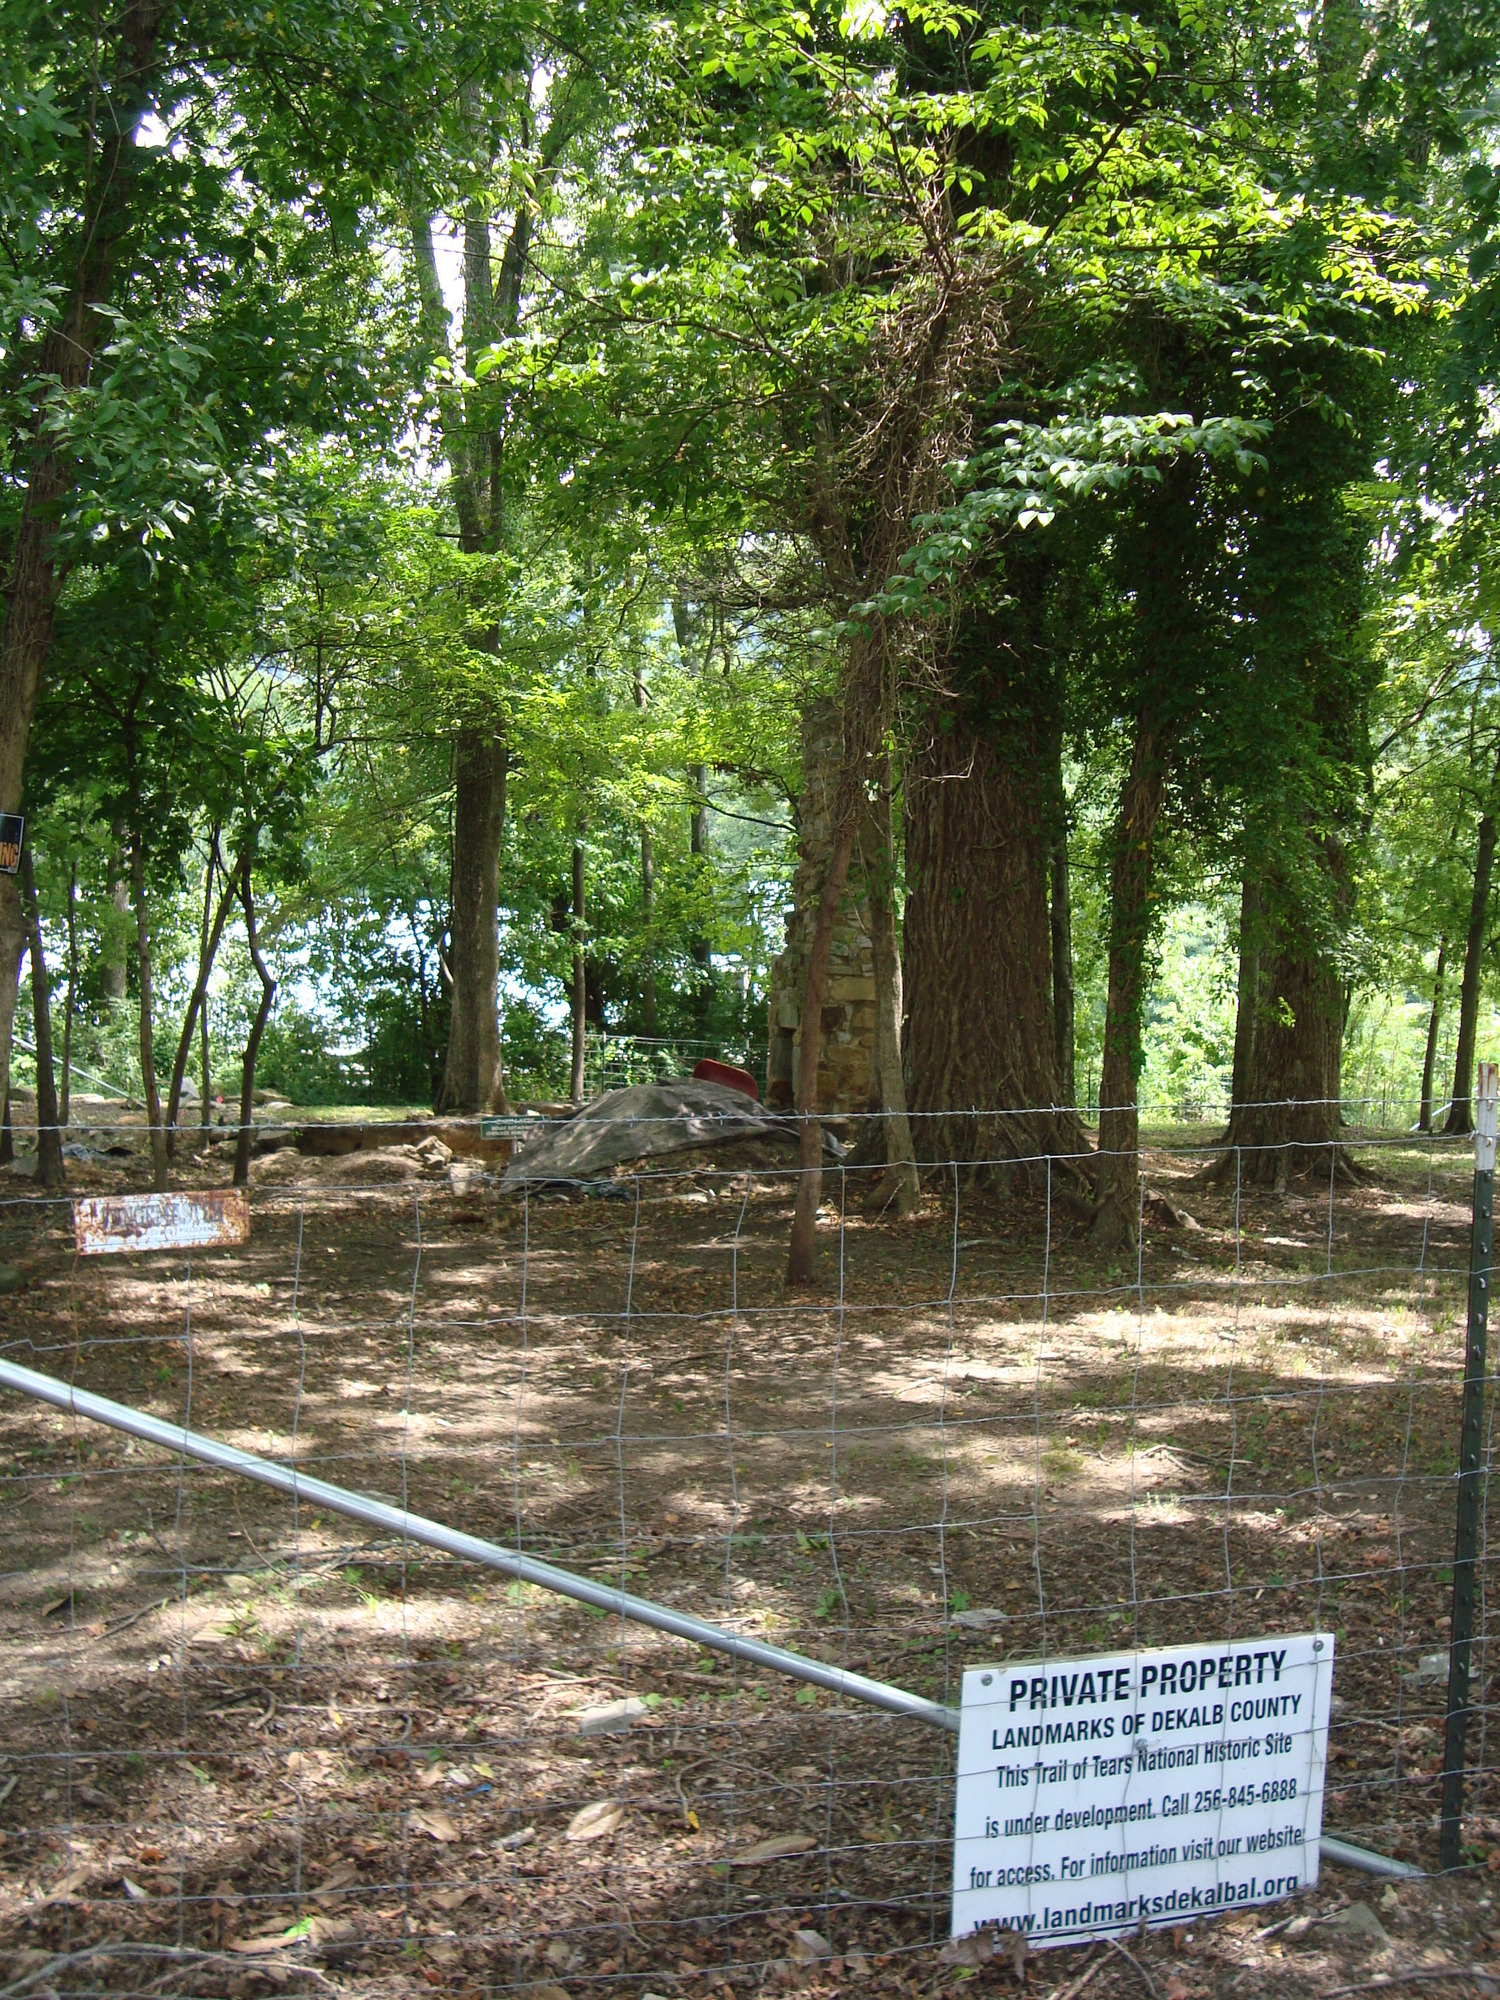 A fence and sign marks Private Property - Landmarks of DeKalb County at Fort Payne Cabin Historic Site in Fort Payne, Alabama